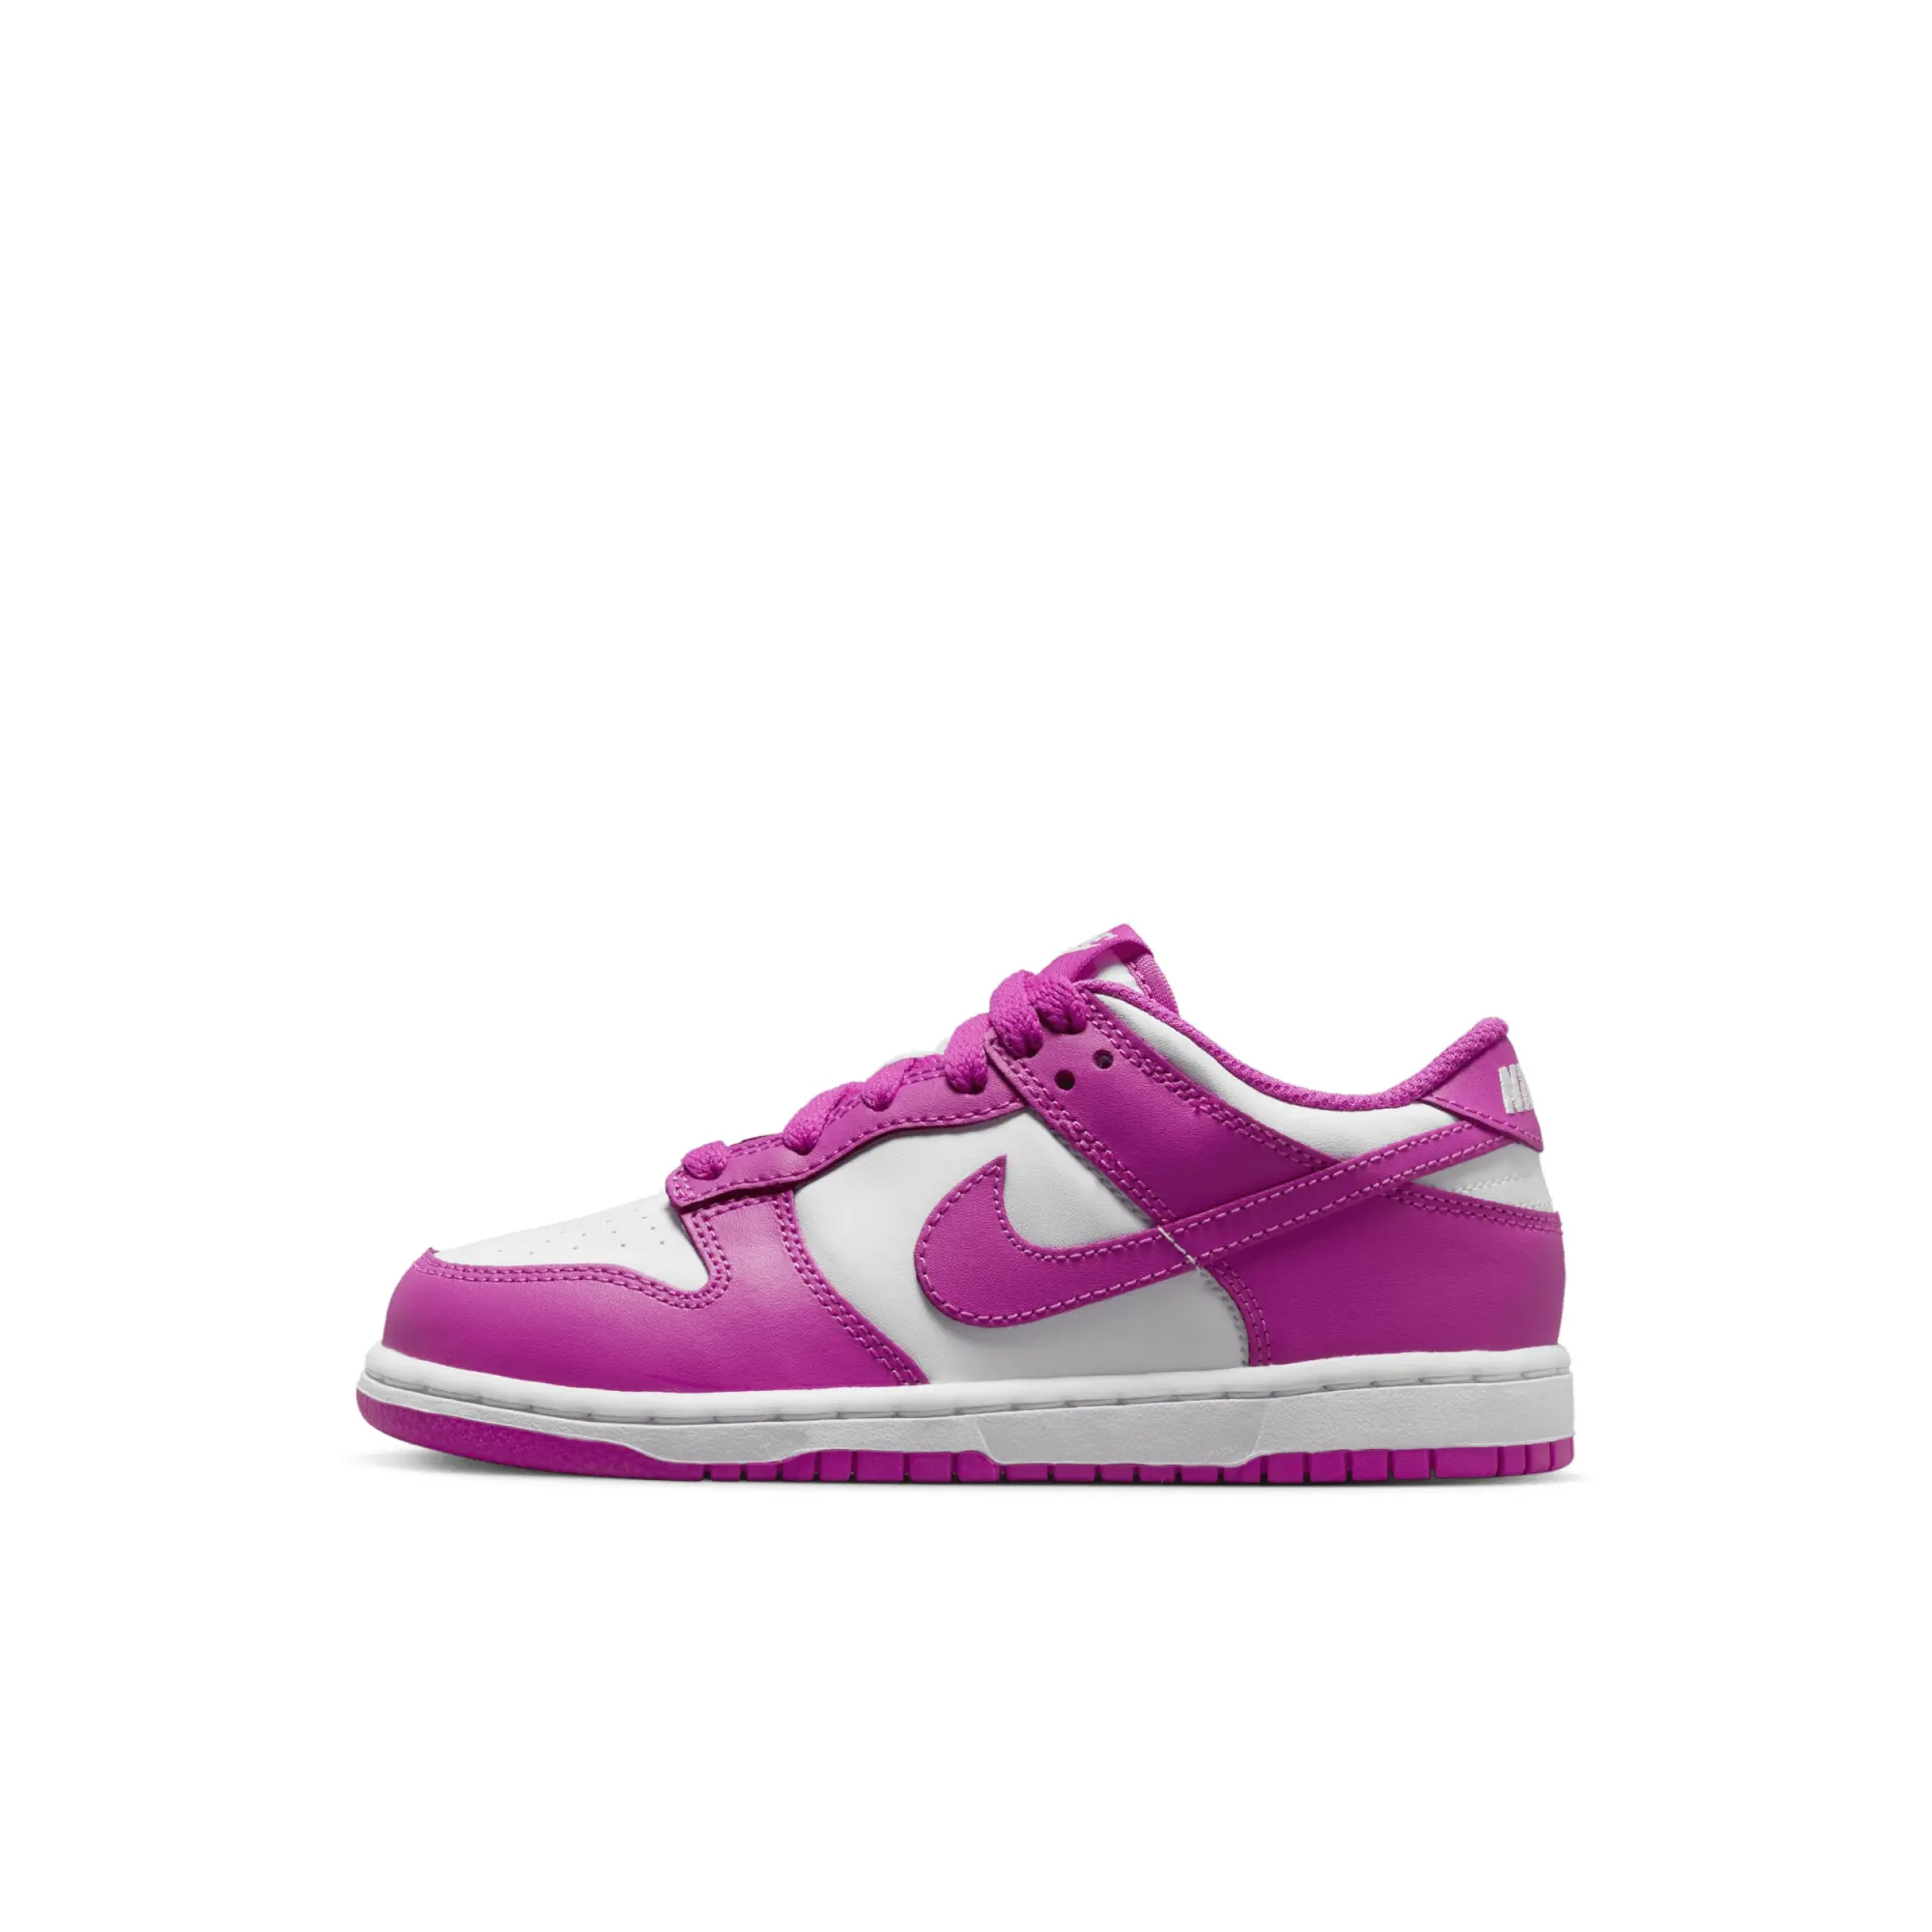 Nike Dunk Low Younger Kids' Shoes - White